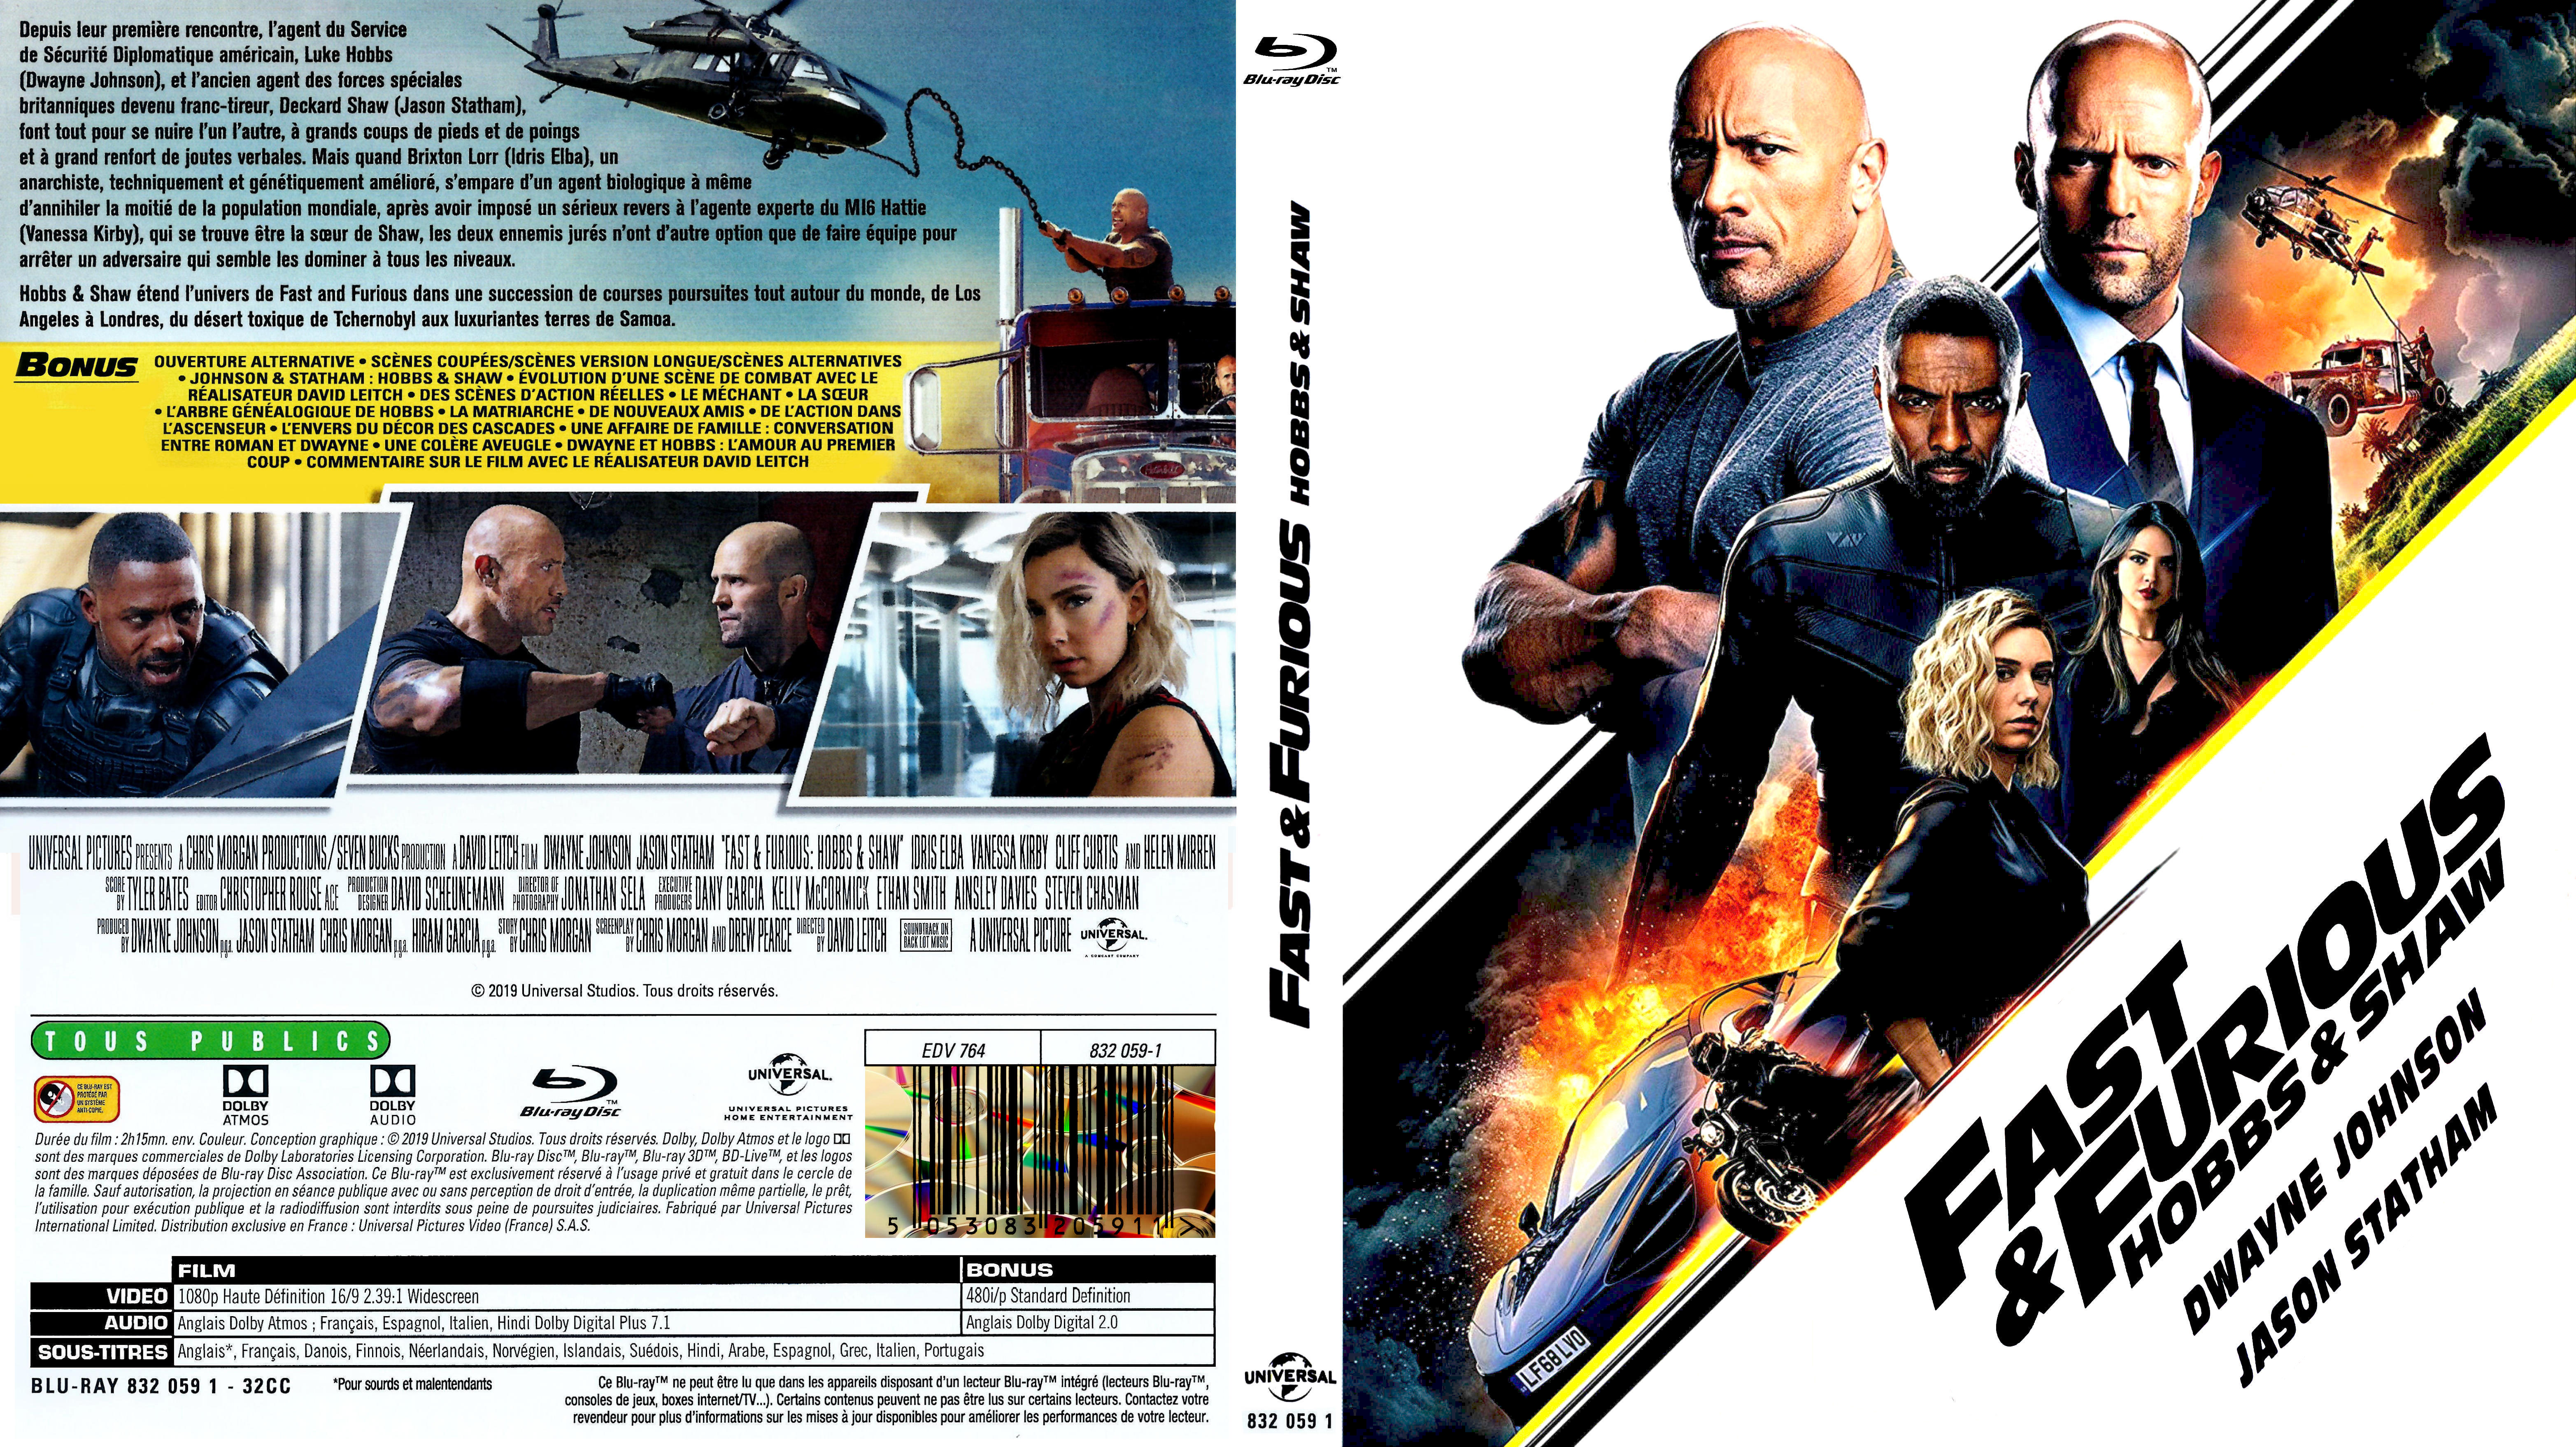 Jaquette DVD Fast & furious Hobbs & Shaw (BLU-RAY)